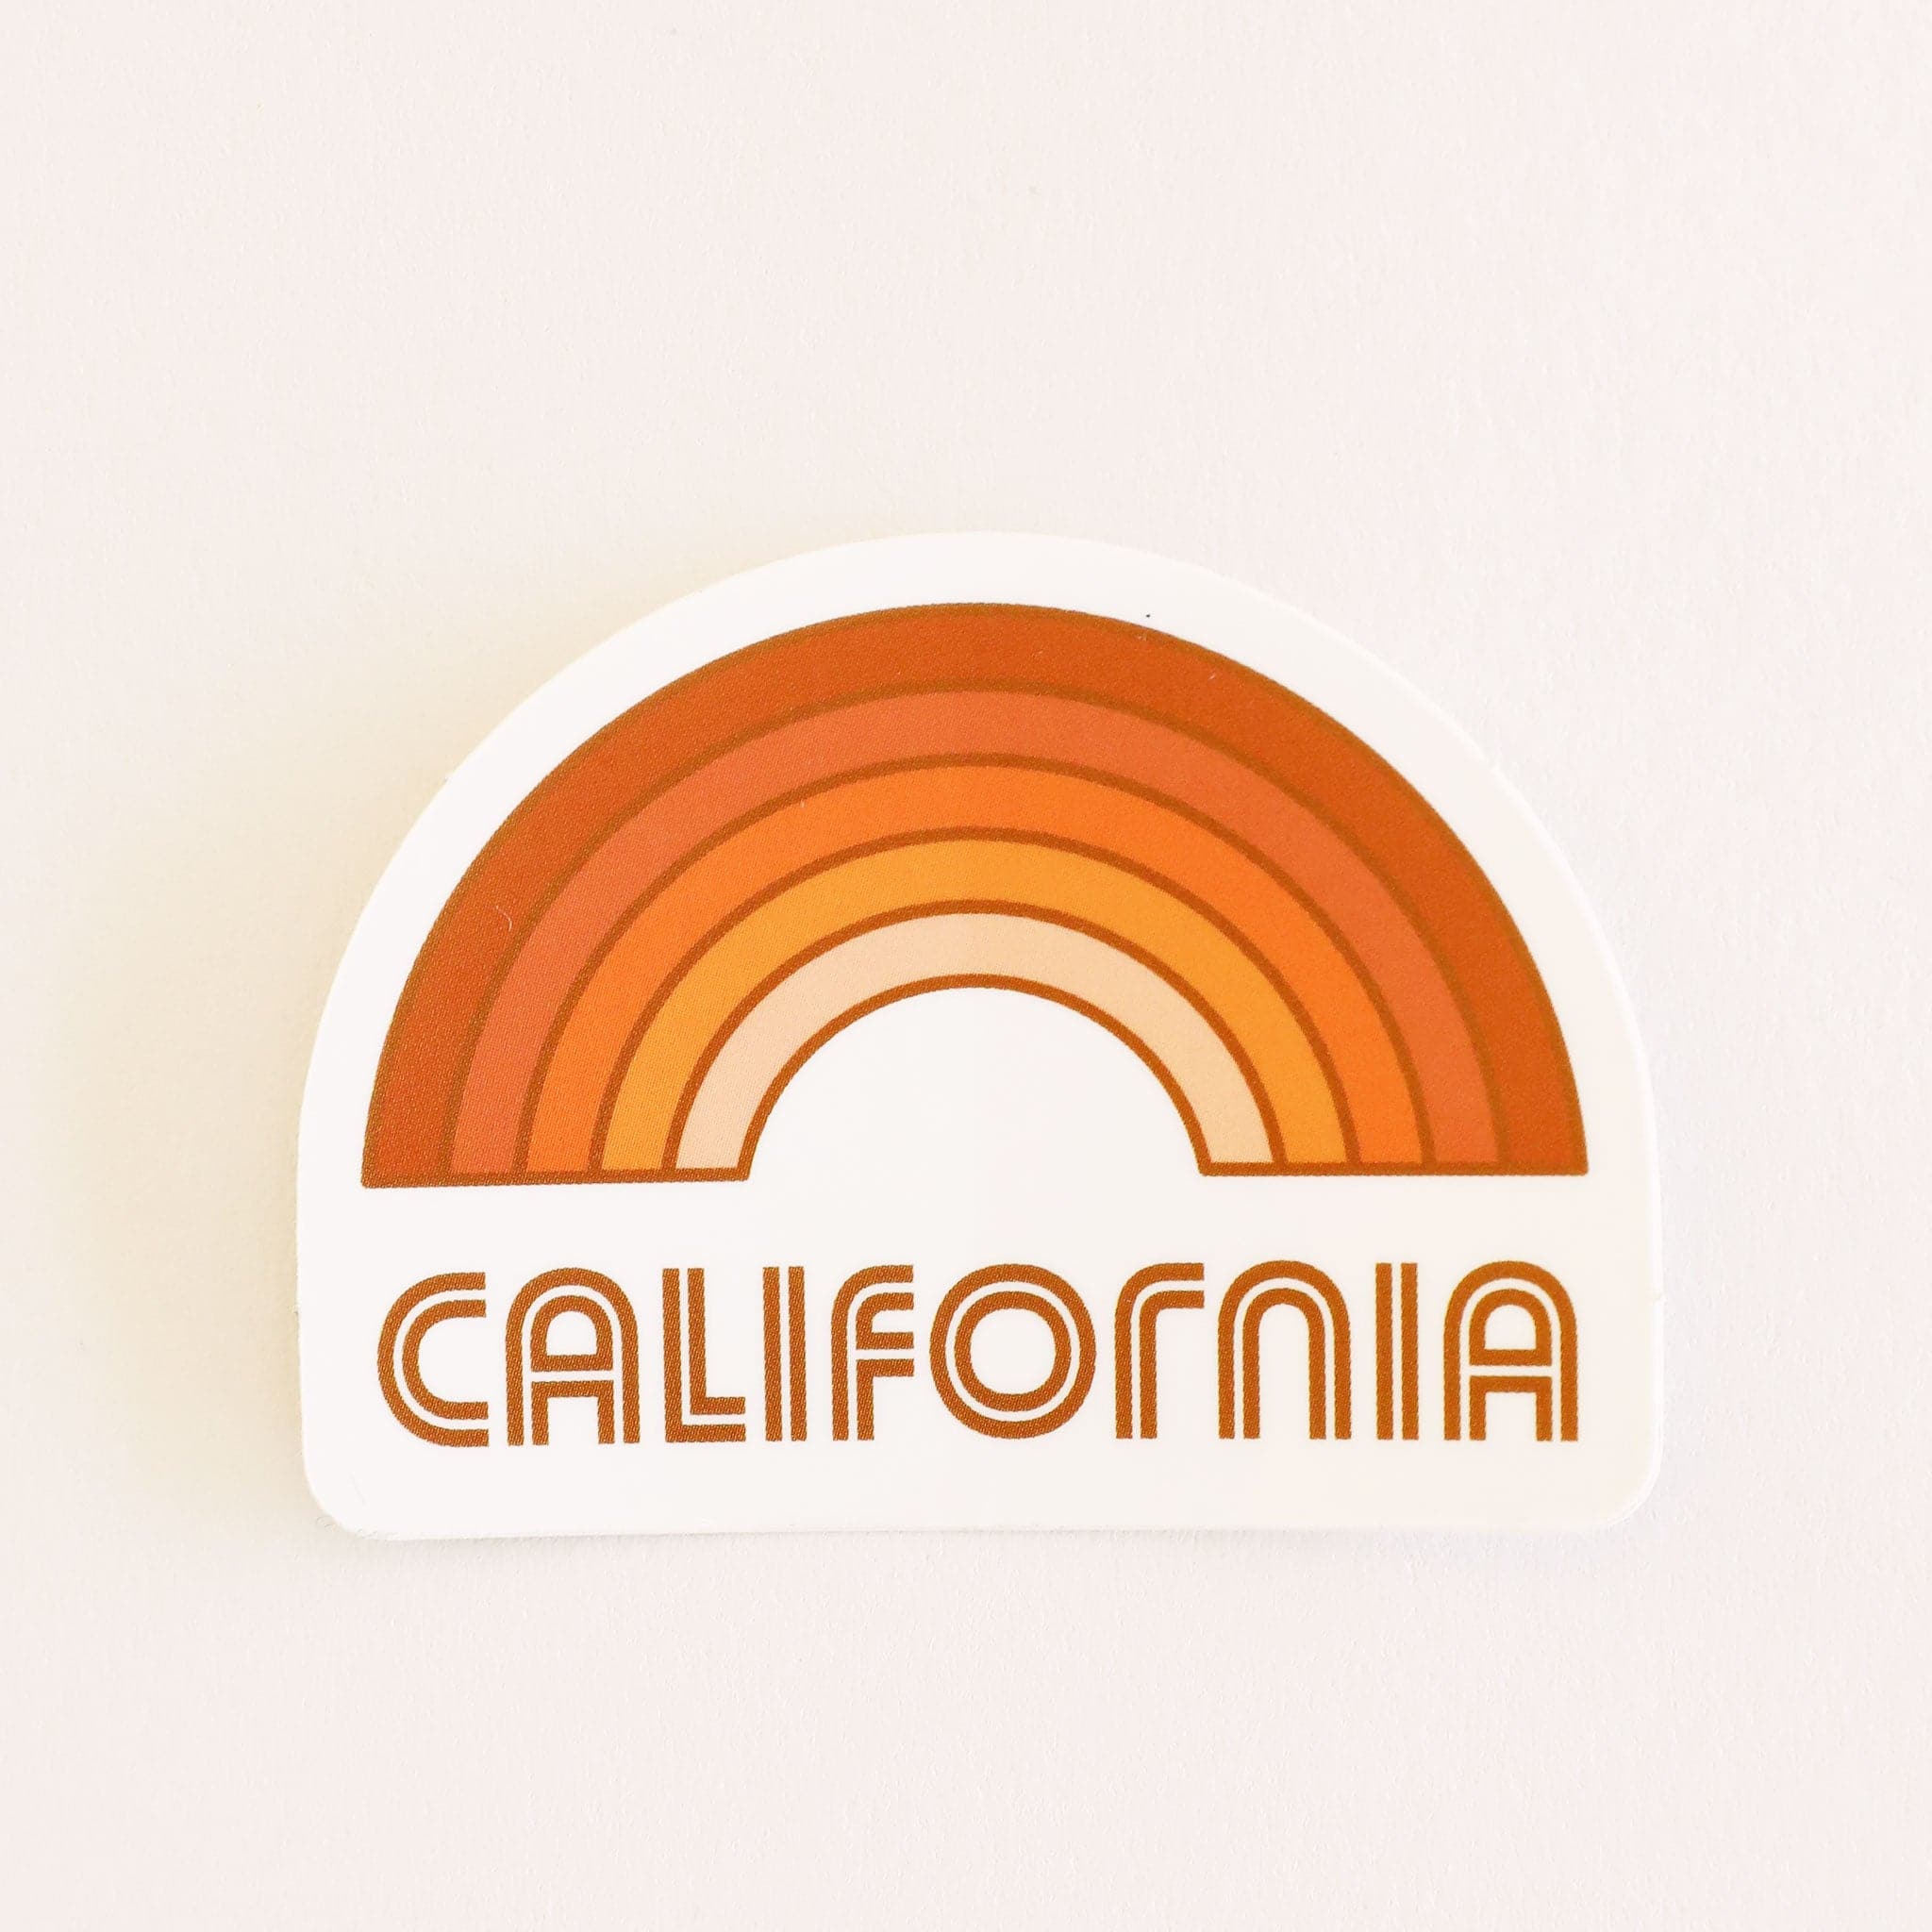 A rainbow sticker made up of different shades of orange and &quot;California&quot; written in orange letters on the bottom underneath the rainbow graphic.